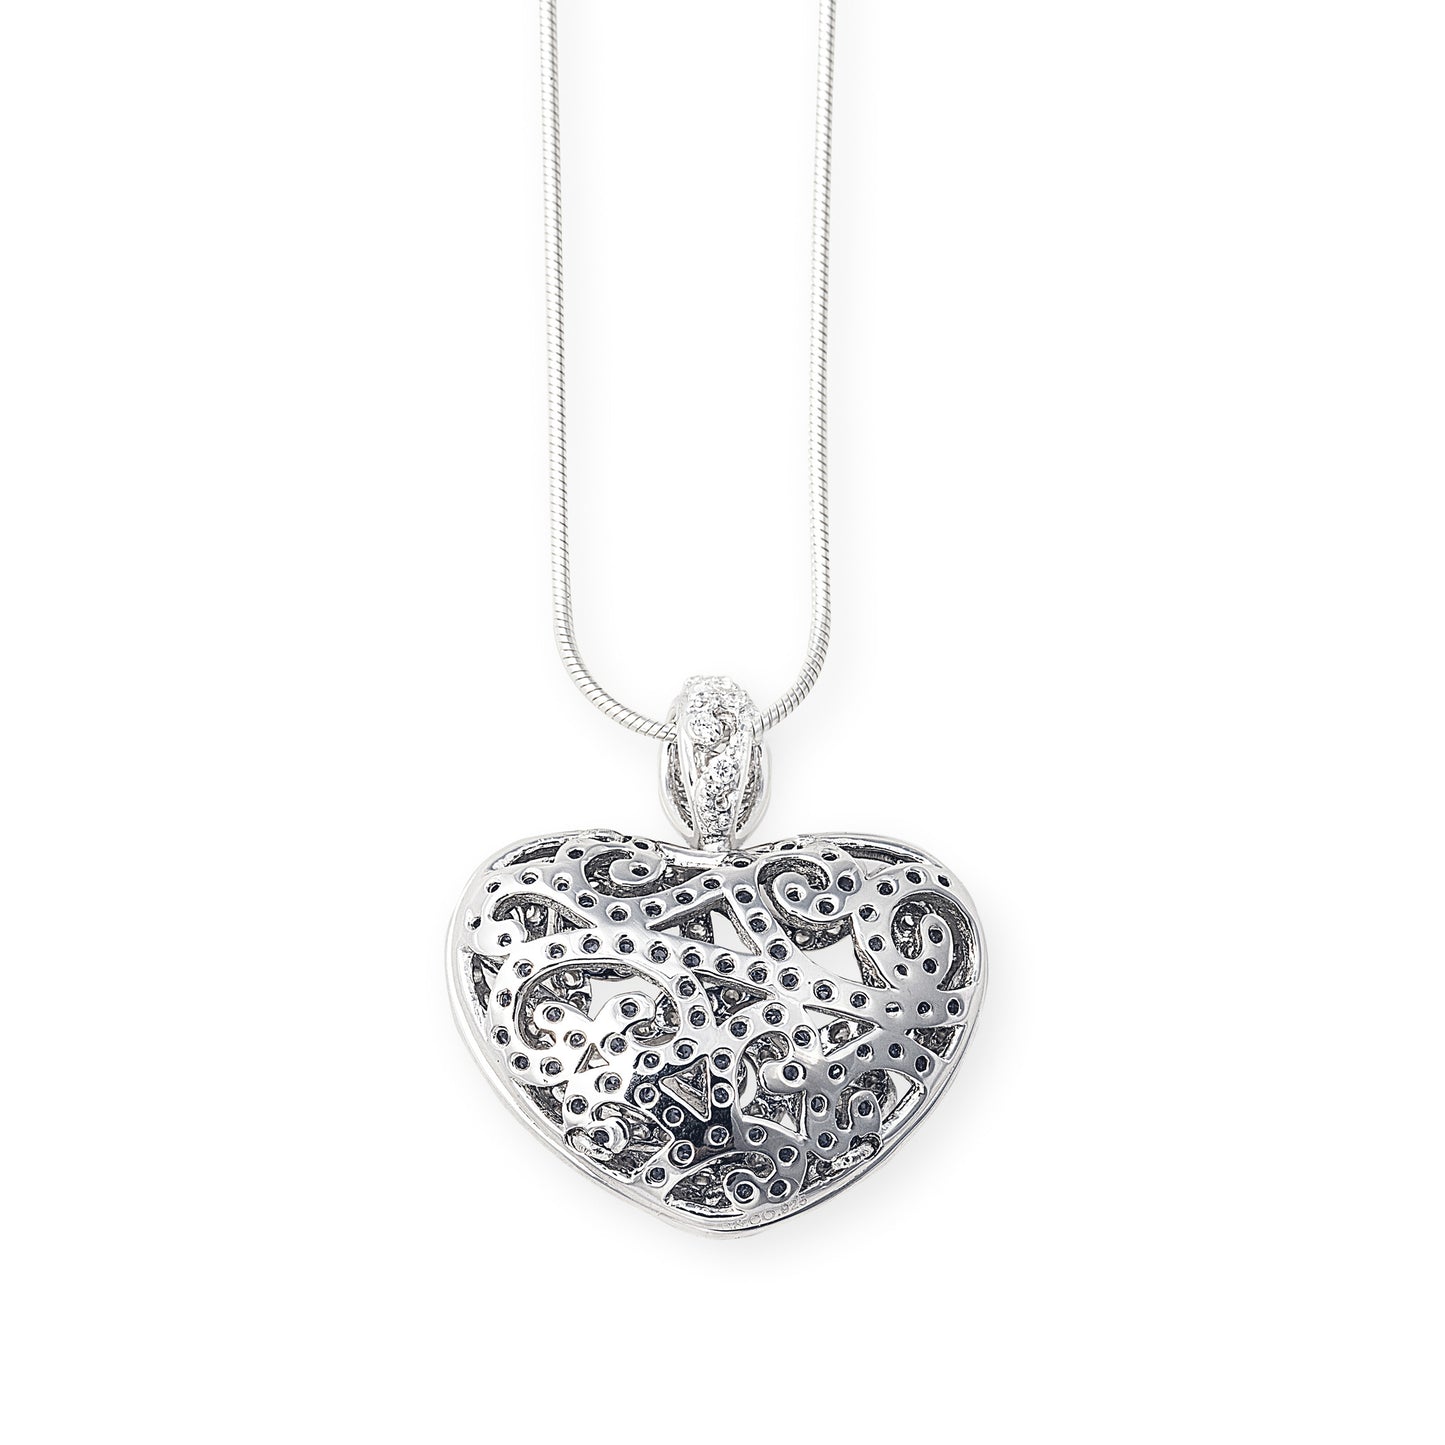 True Romance Necklace in 925 sterling silver. Hollow heart pendant encrusted with cubic zirconia stones. Showing rear view. Worldwide shipping.